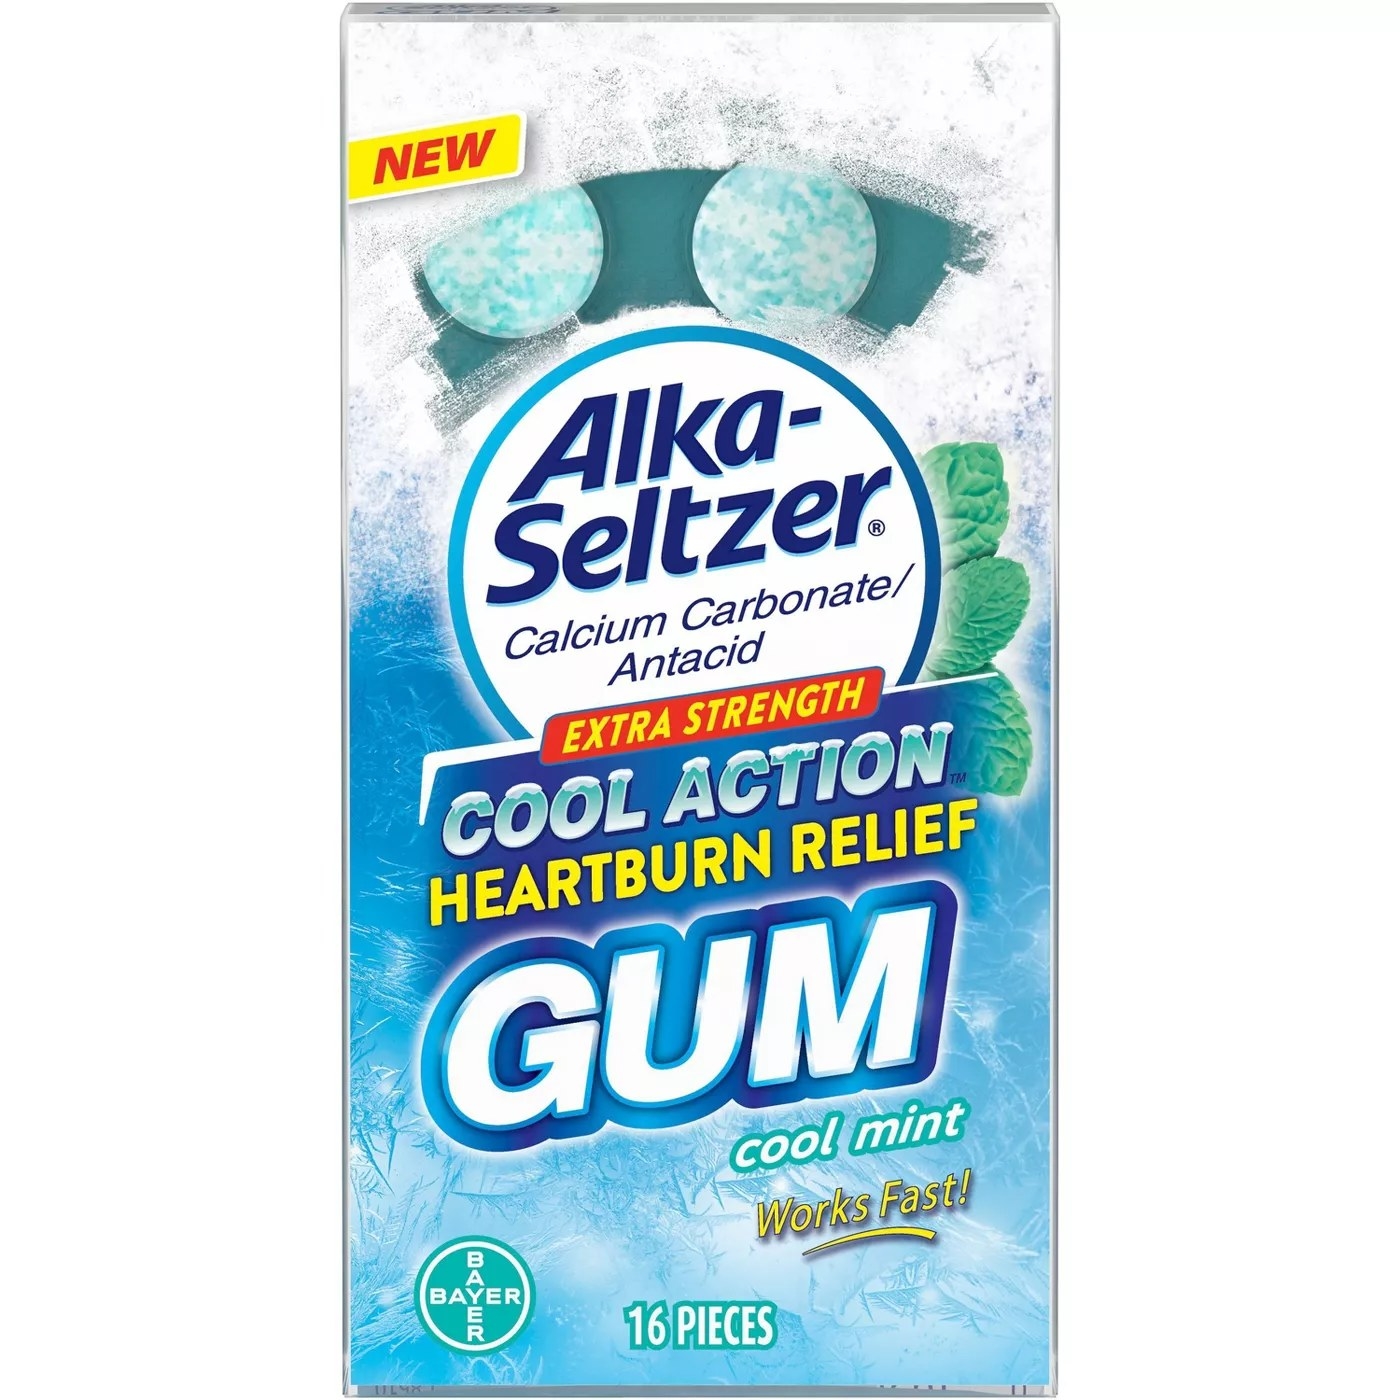 Alka-Seltzer Calcium Carbonate Antacid Extra Strength Cool Action Heartburn Relief Gum with a cool mint flavor that works fast